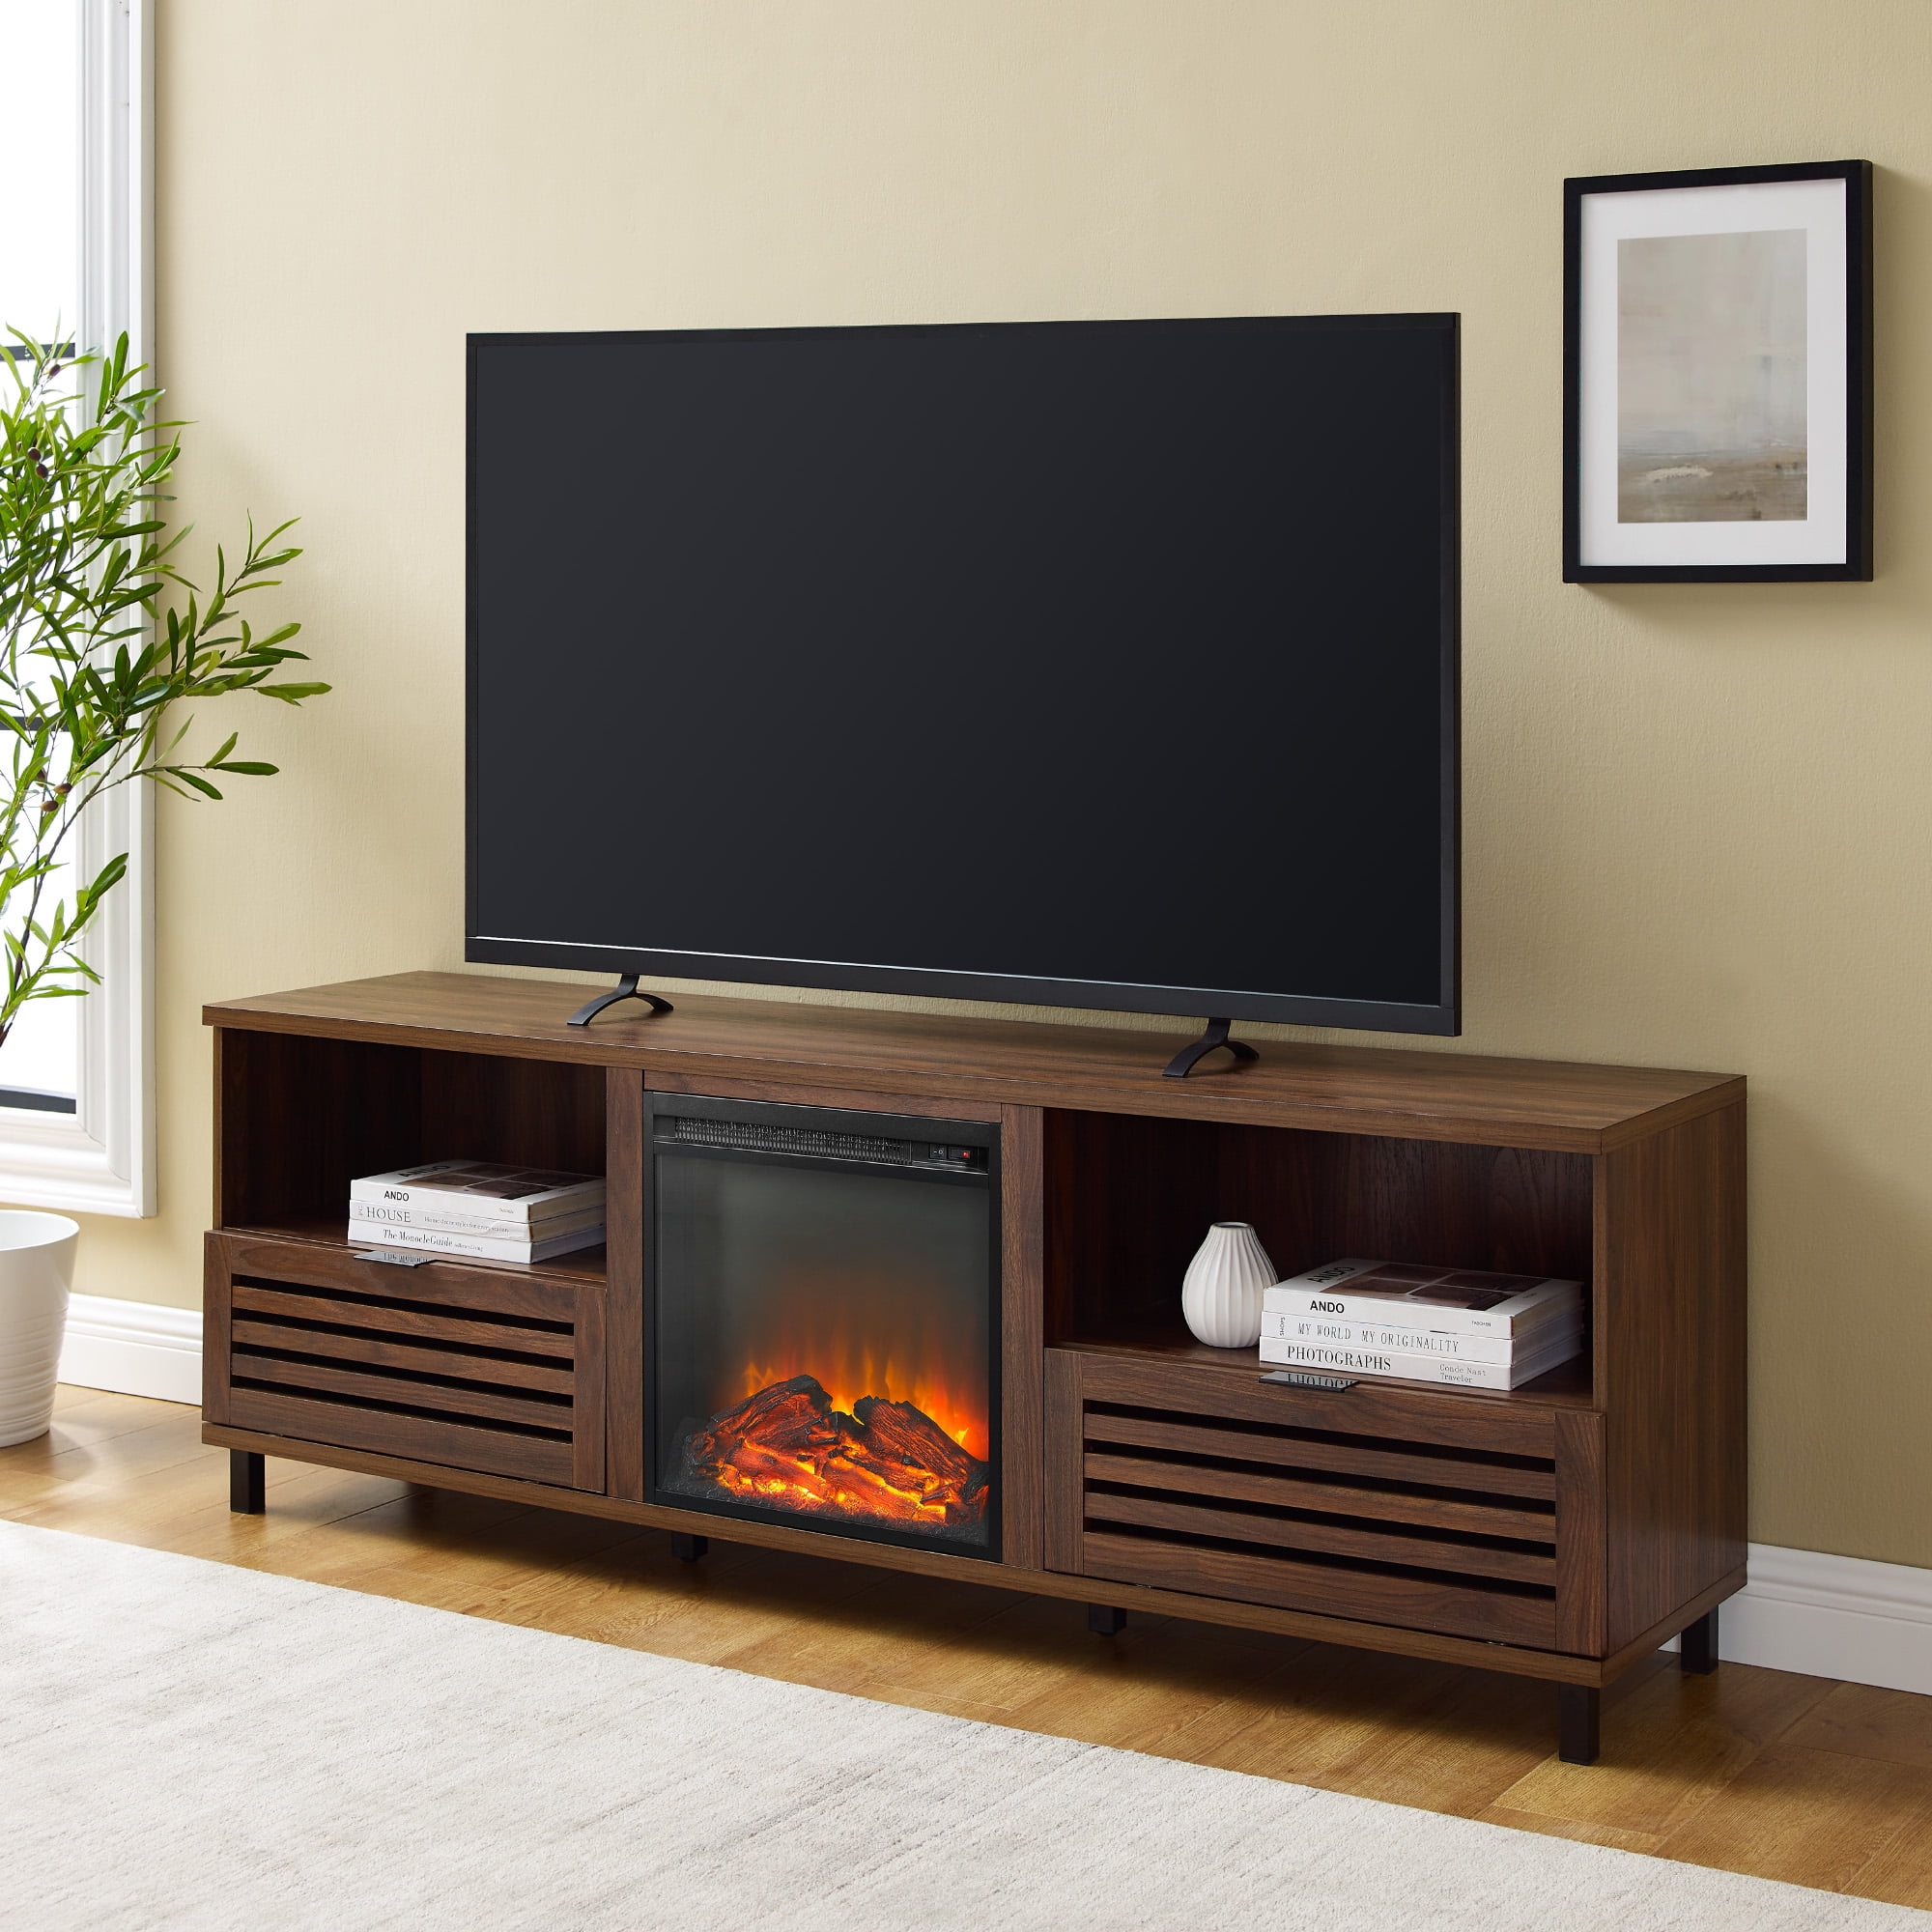 Manor Park Industrial Fireplace TV Stand for TVs up to 80"